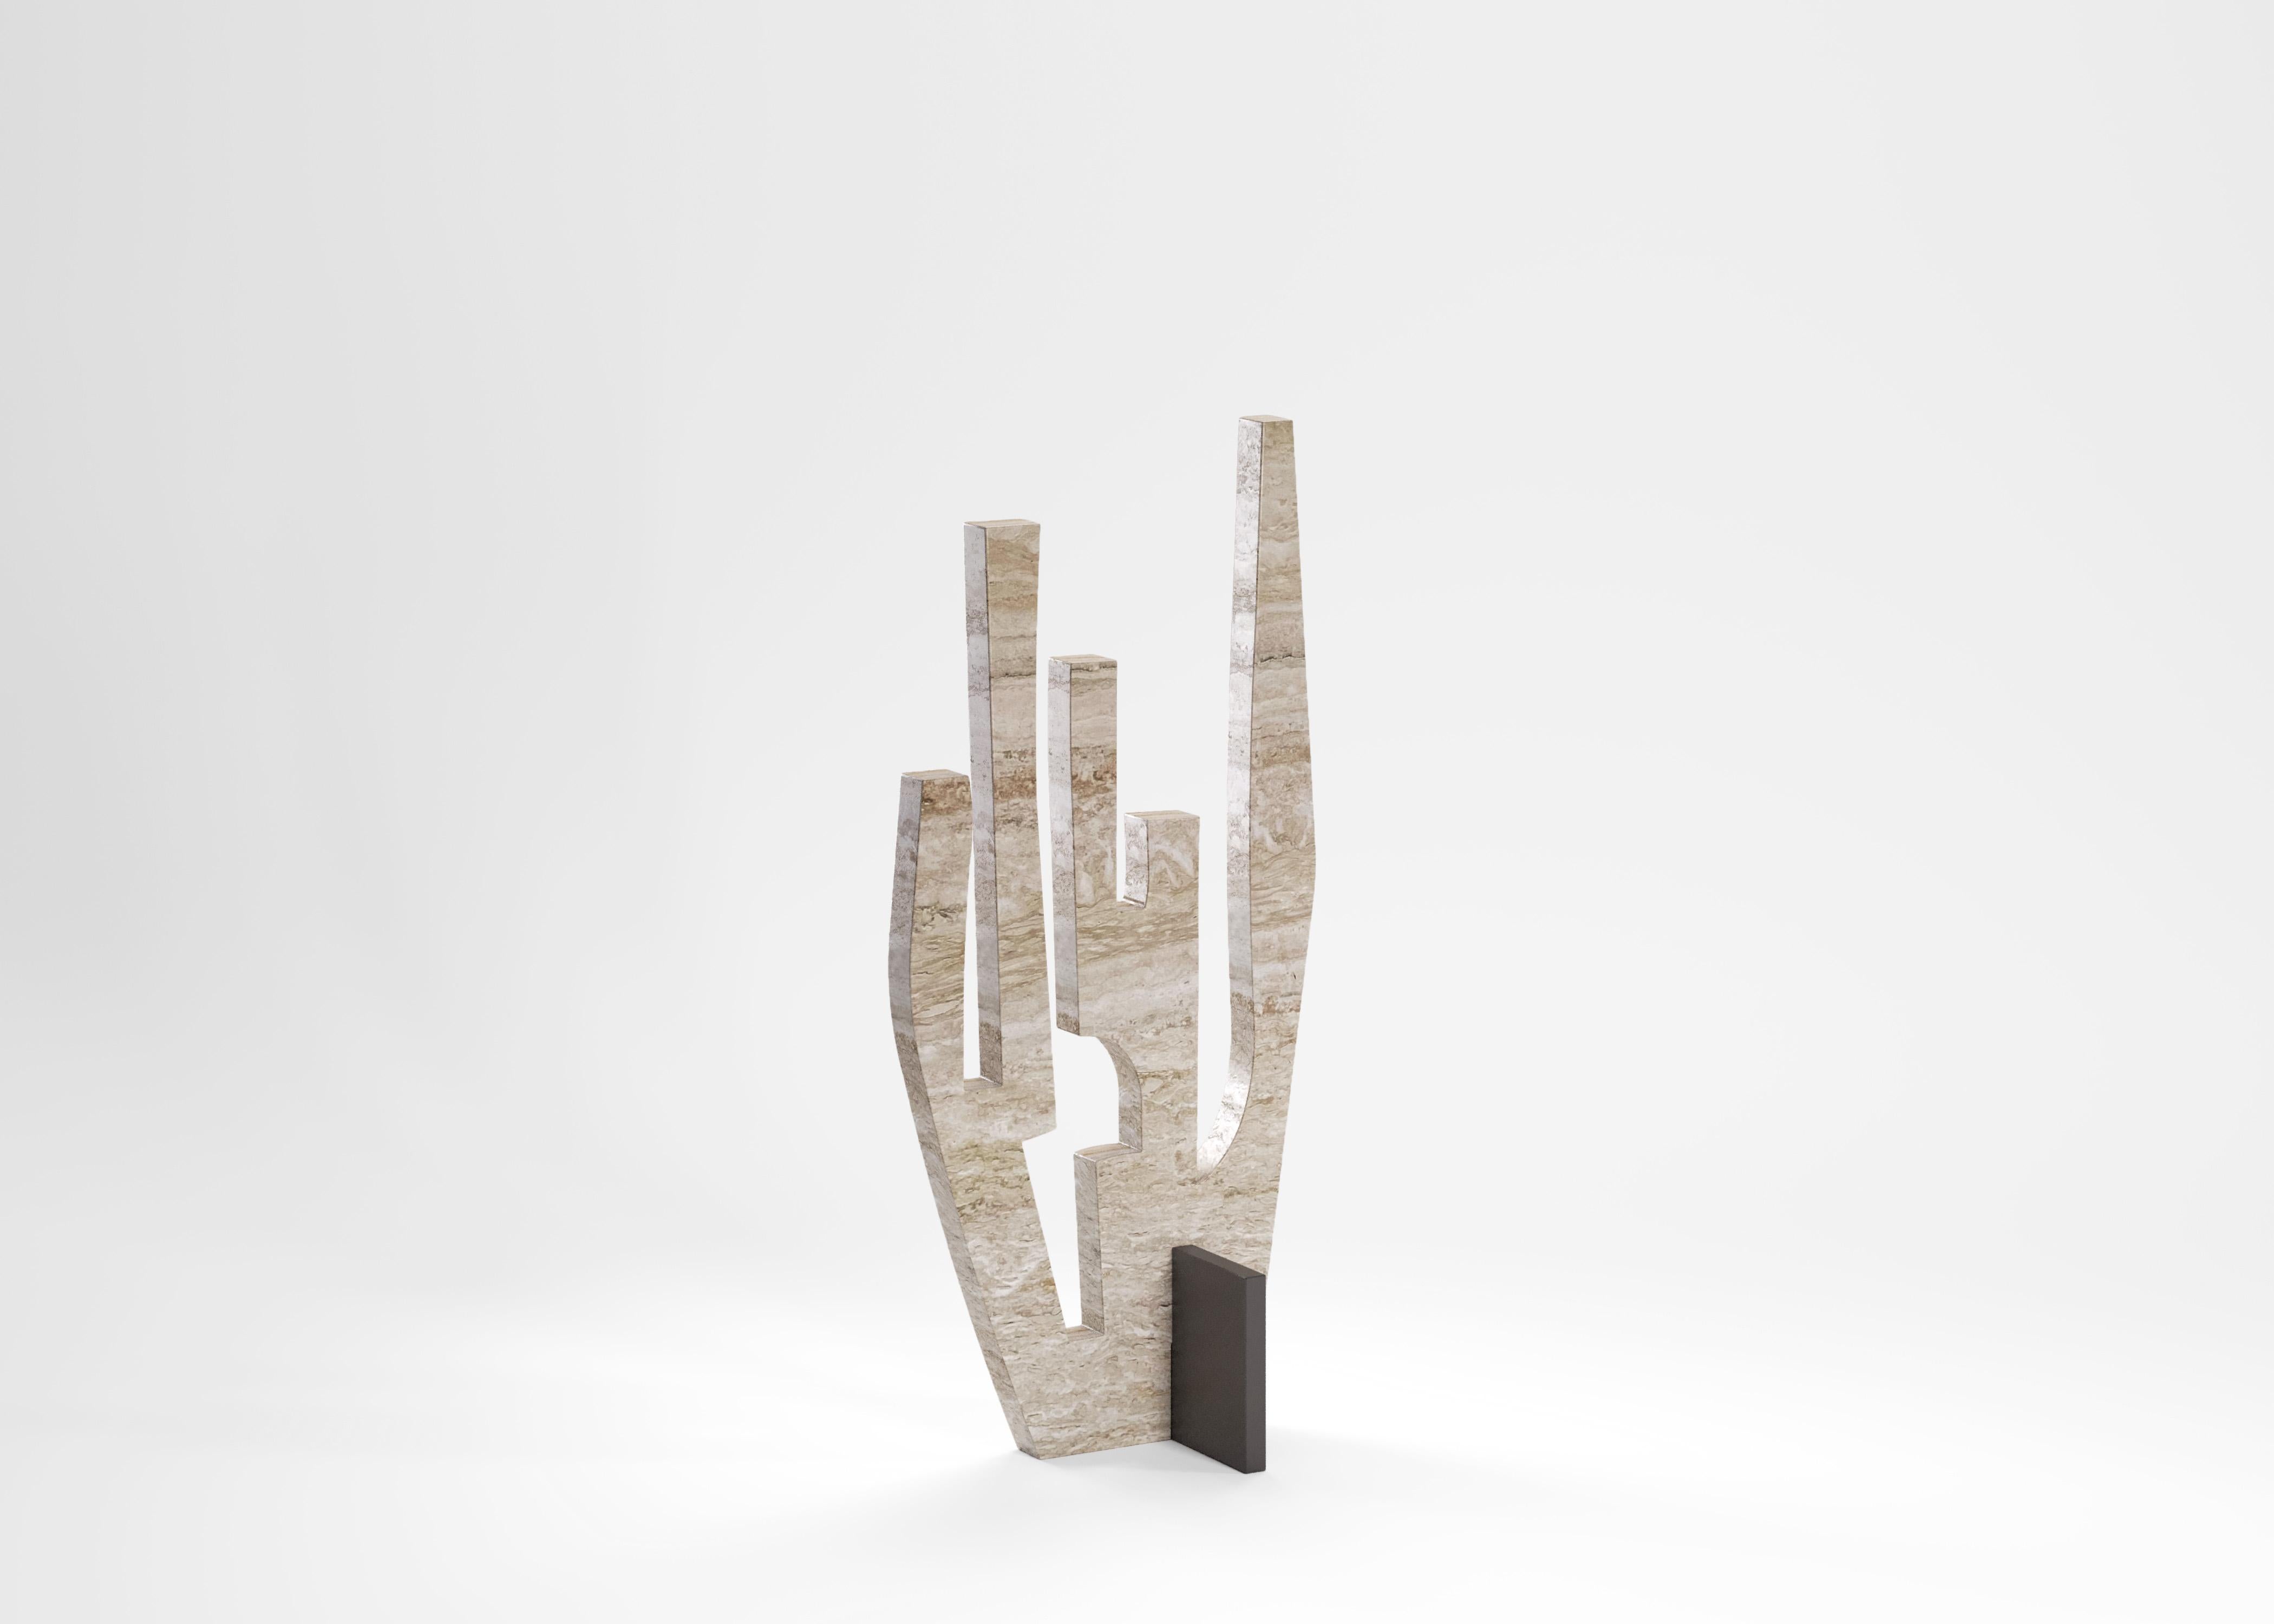 Coral sculpture by Edizione Limitata
Limited Edition of 150 pieces. Signed and numbered.
Designers: Simone Fanciullacci 
Dimensions: H 42 × W 12 × L 19 cm
Materials: Travertine, metal

Edizione Limitata, that is to say “Limited Edition”, is a brand